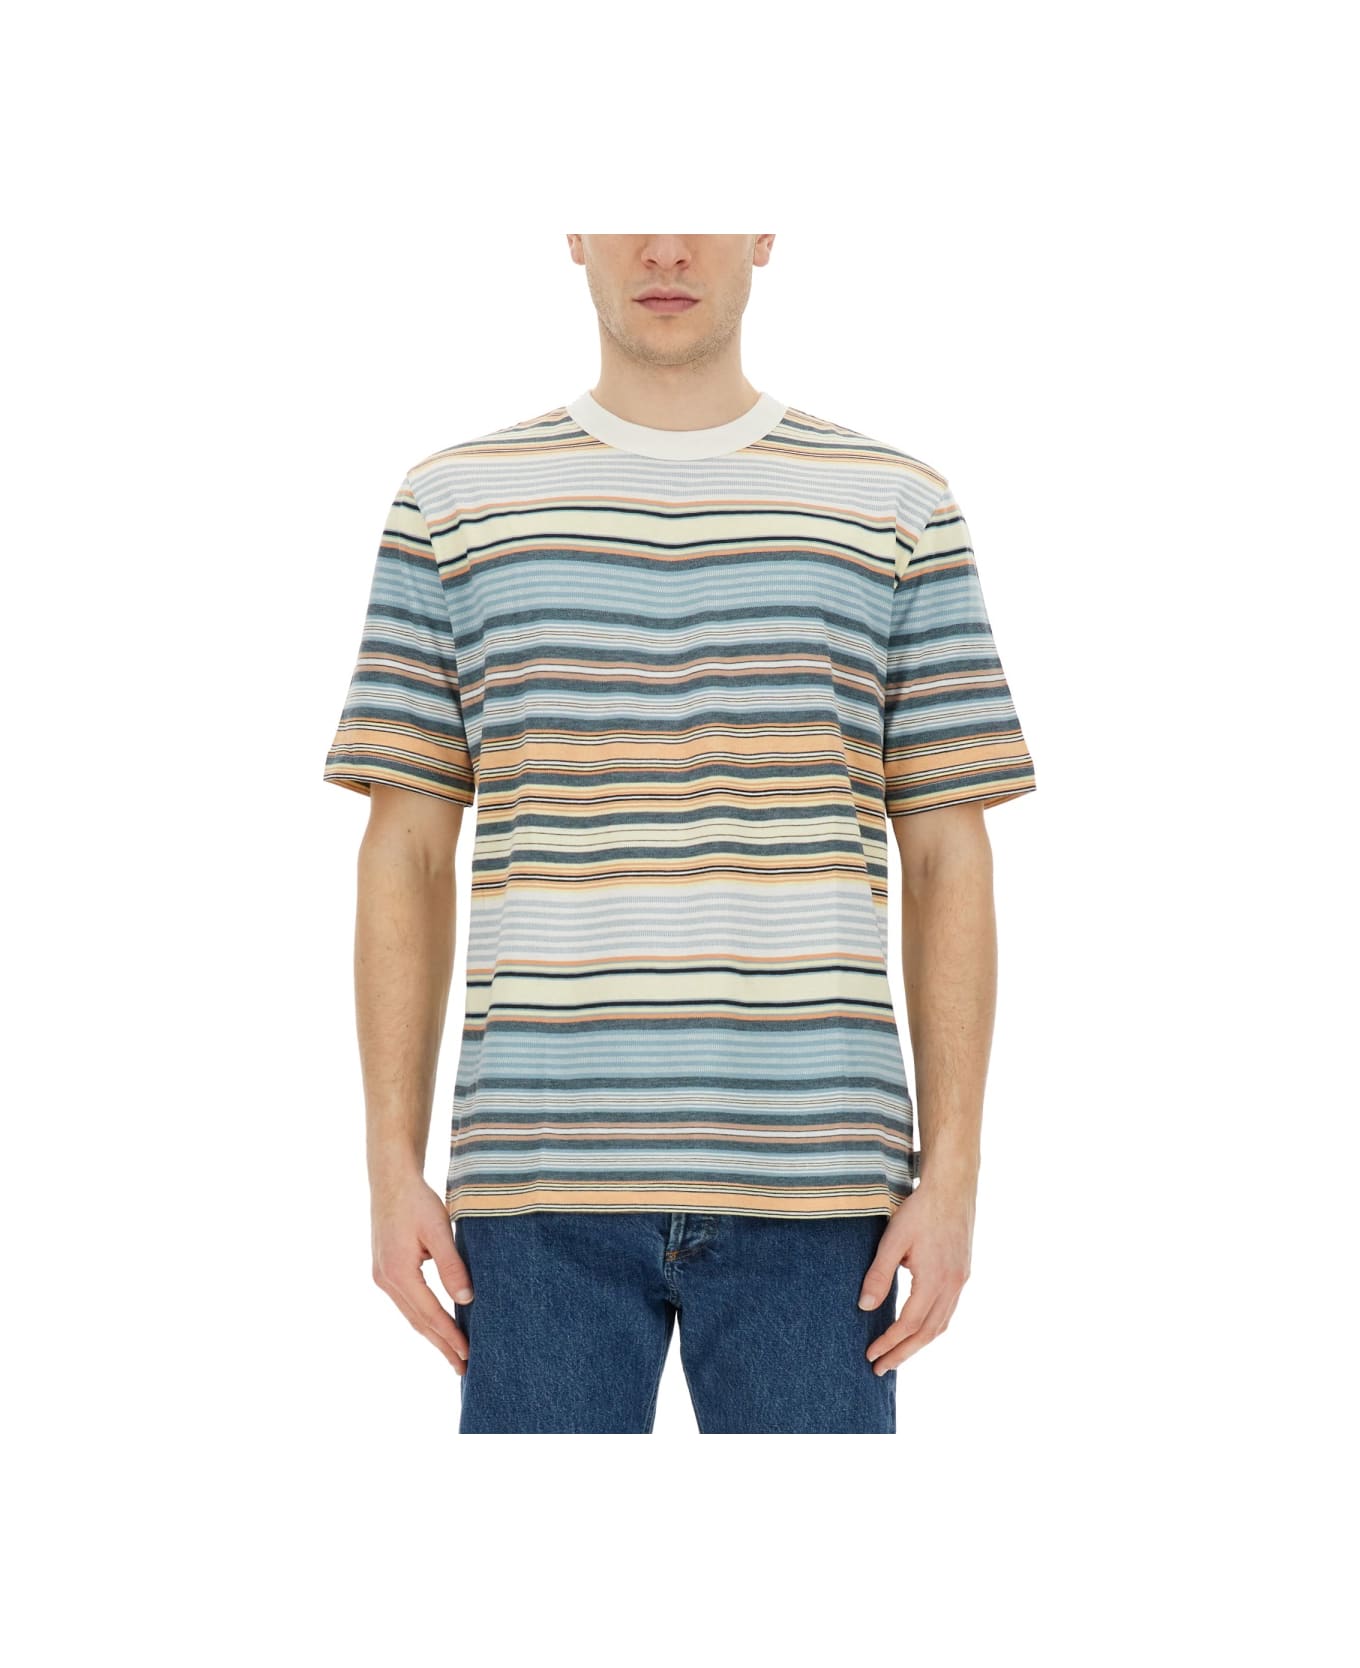 PS by Paul Smith Striped T-shirt - MULTICOLOUR シャツ